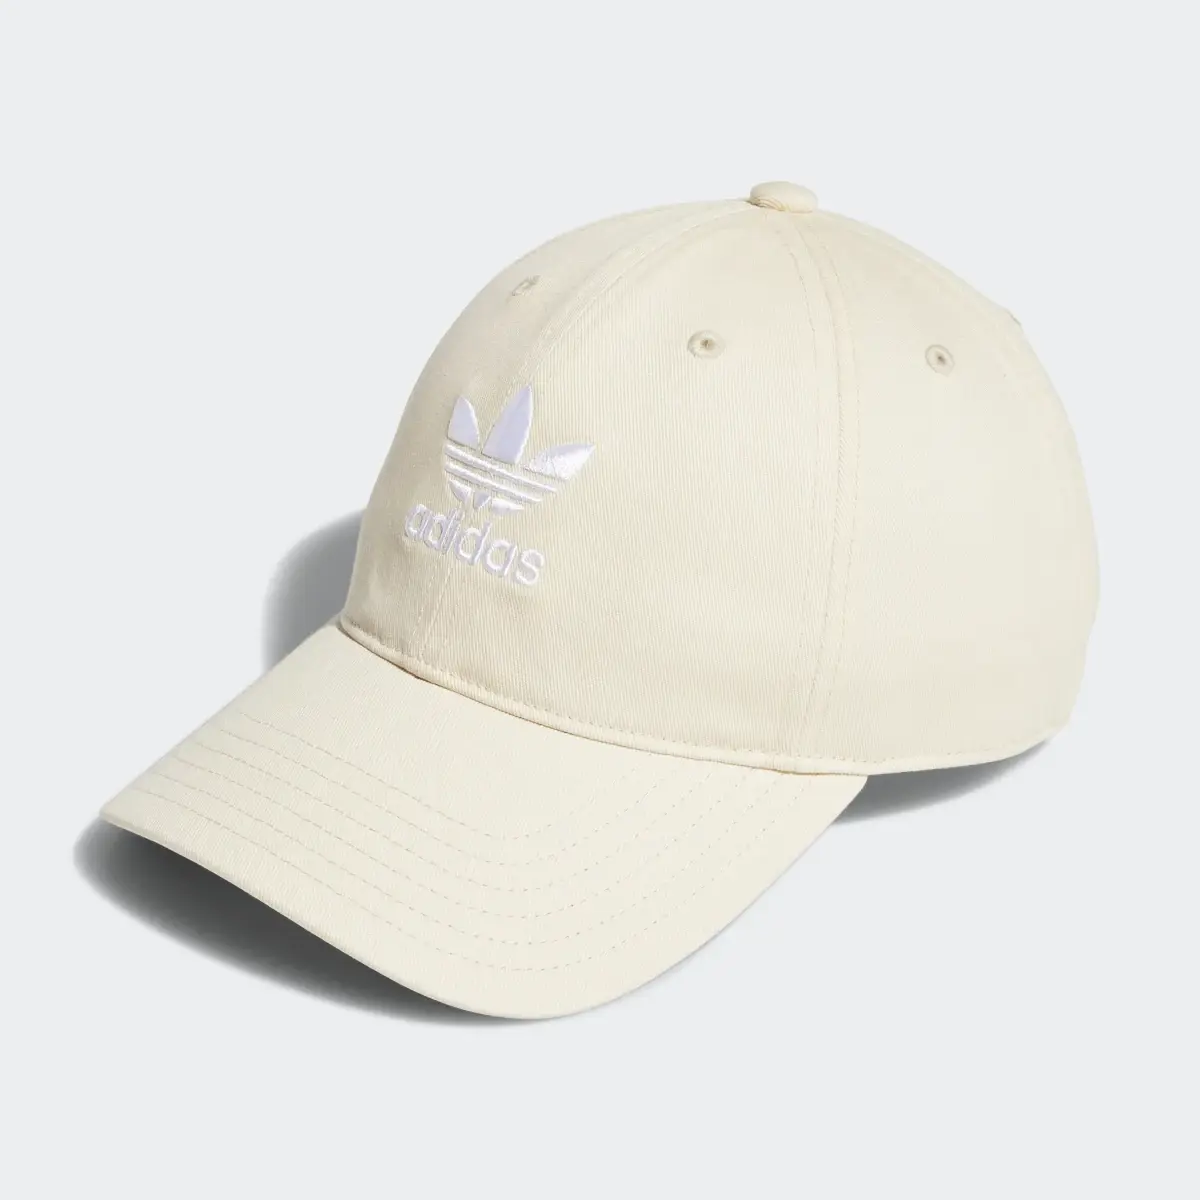 Adidas Relaxed Strap-Back Hat. 2